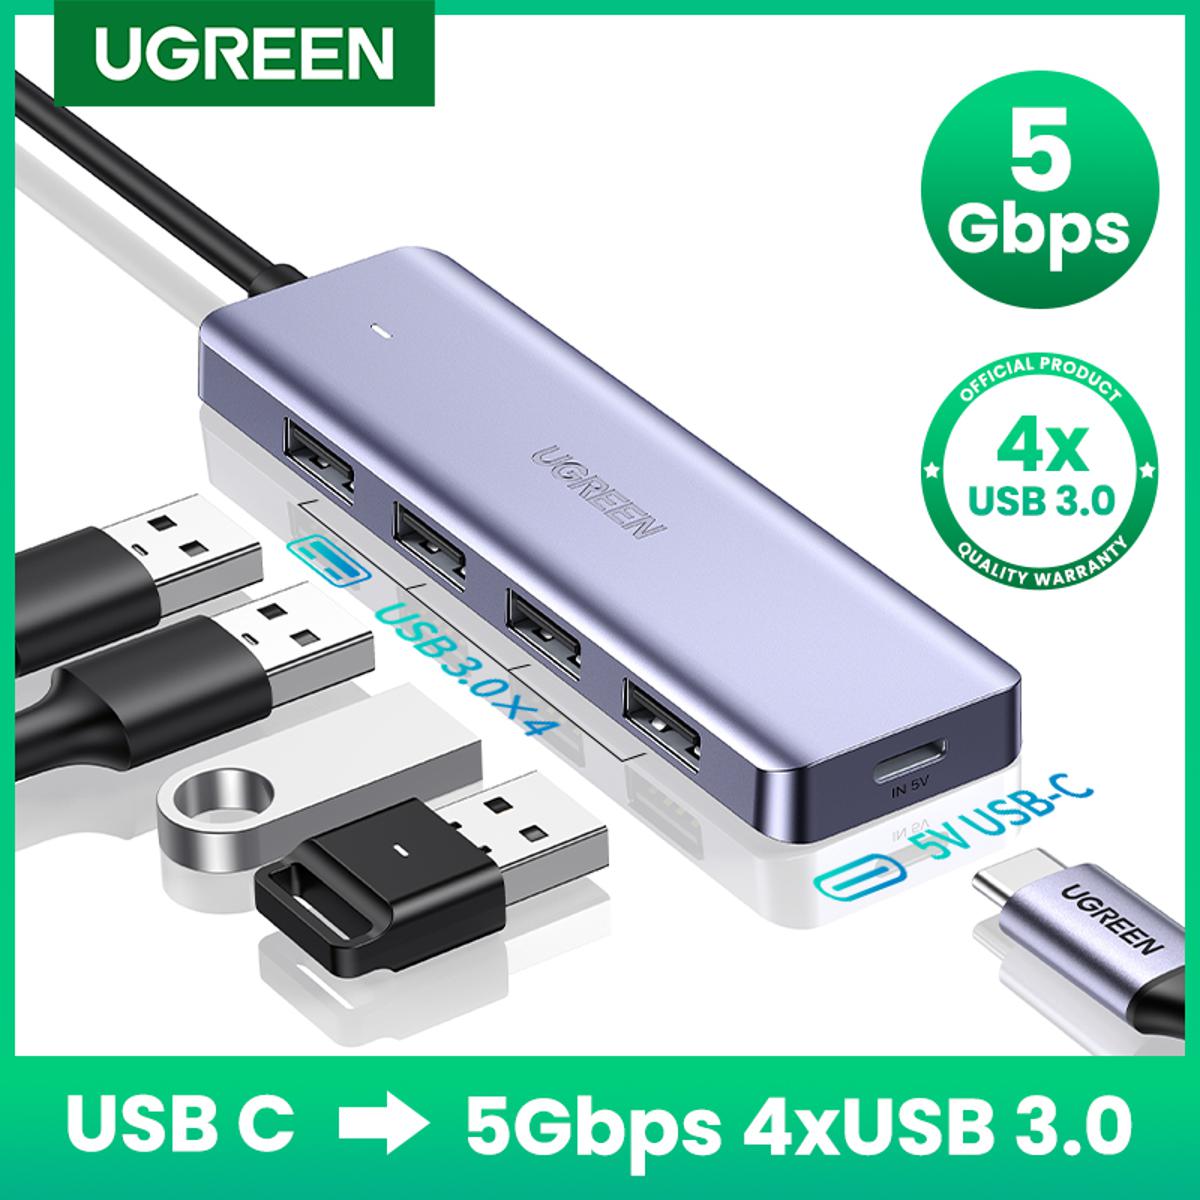 USB C Hub, USB C to USB 3.0 HUB with 4 USB 3.0 Ports Applicable for MacBook  Pro 2018 2017 iMac, Google Chromebook Pixelbook, XPS, Samsung S9, S8 & More  USB Type